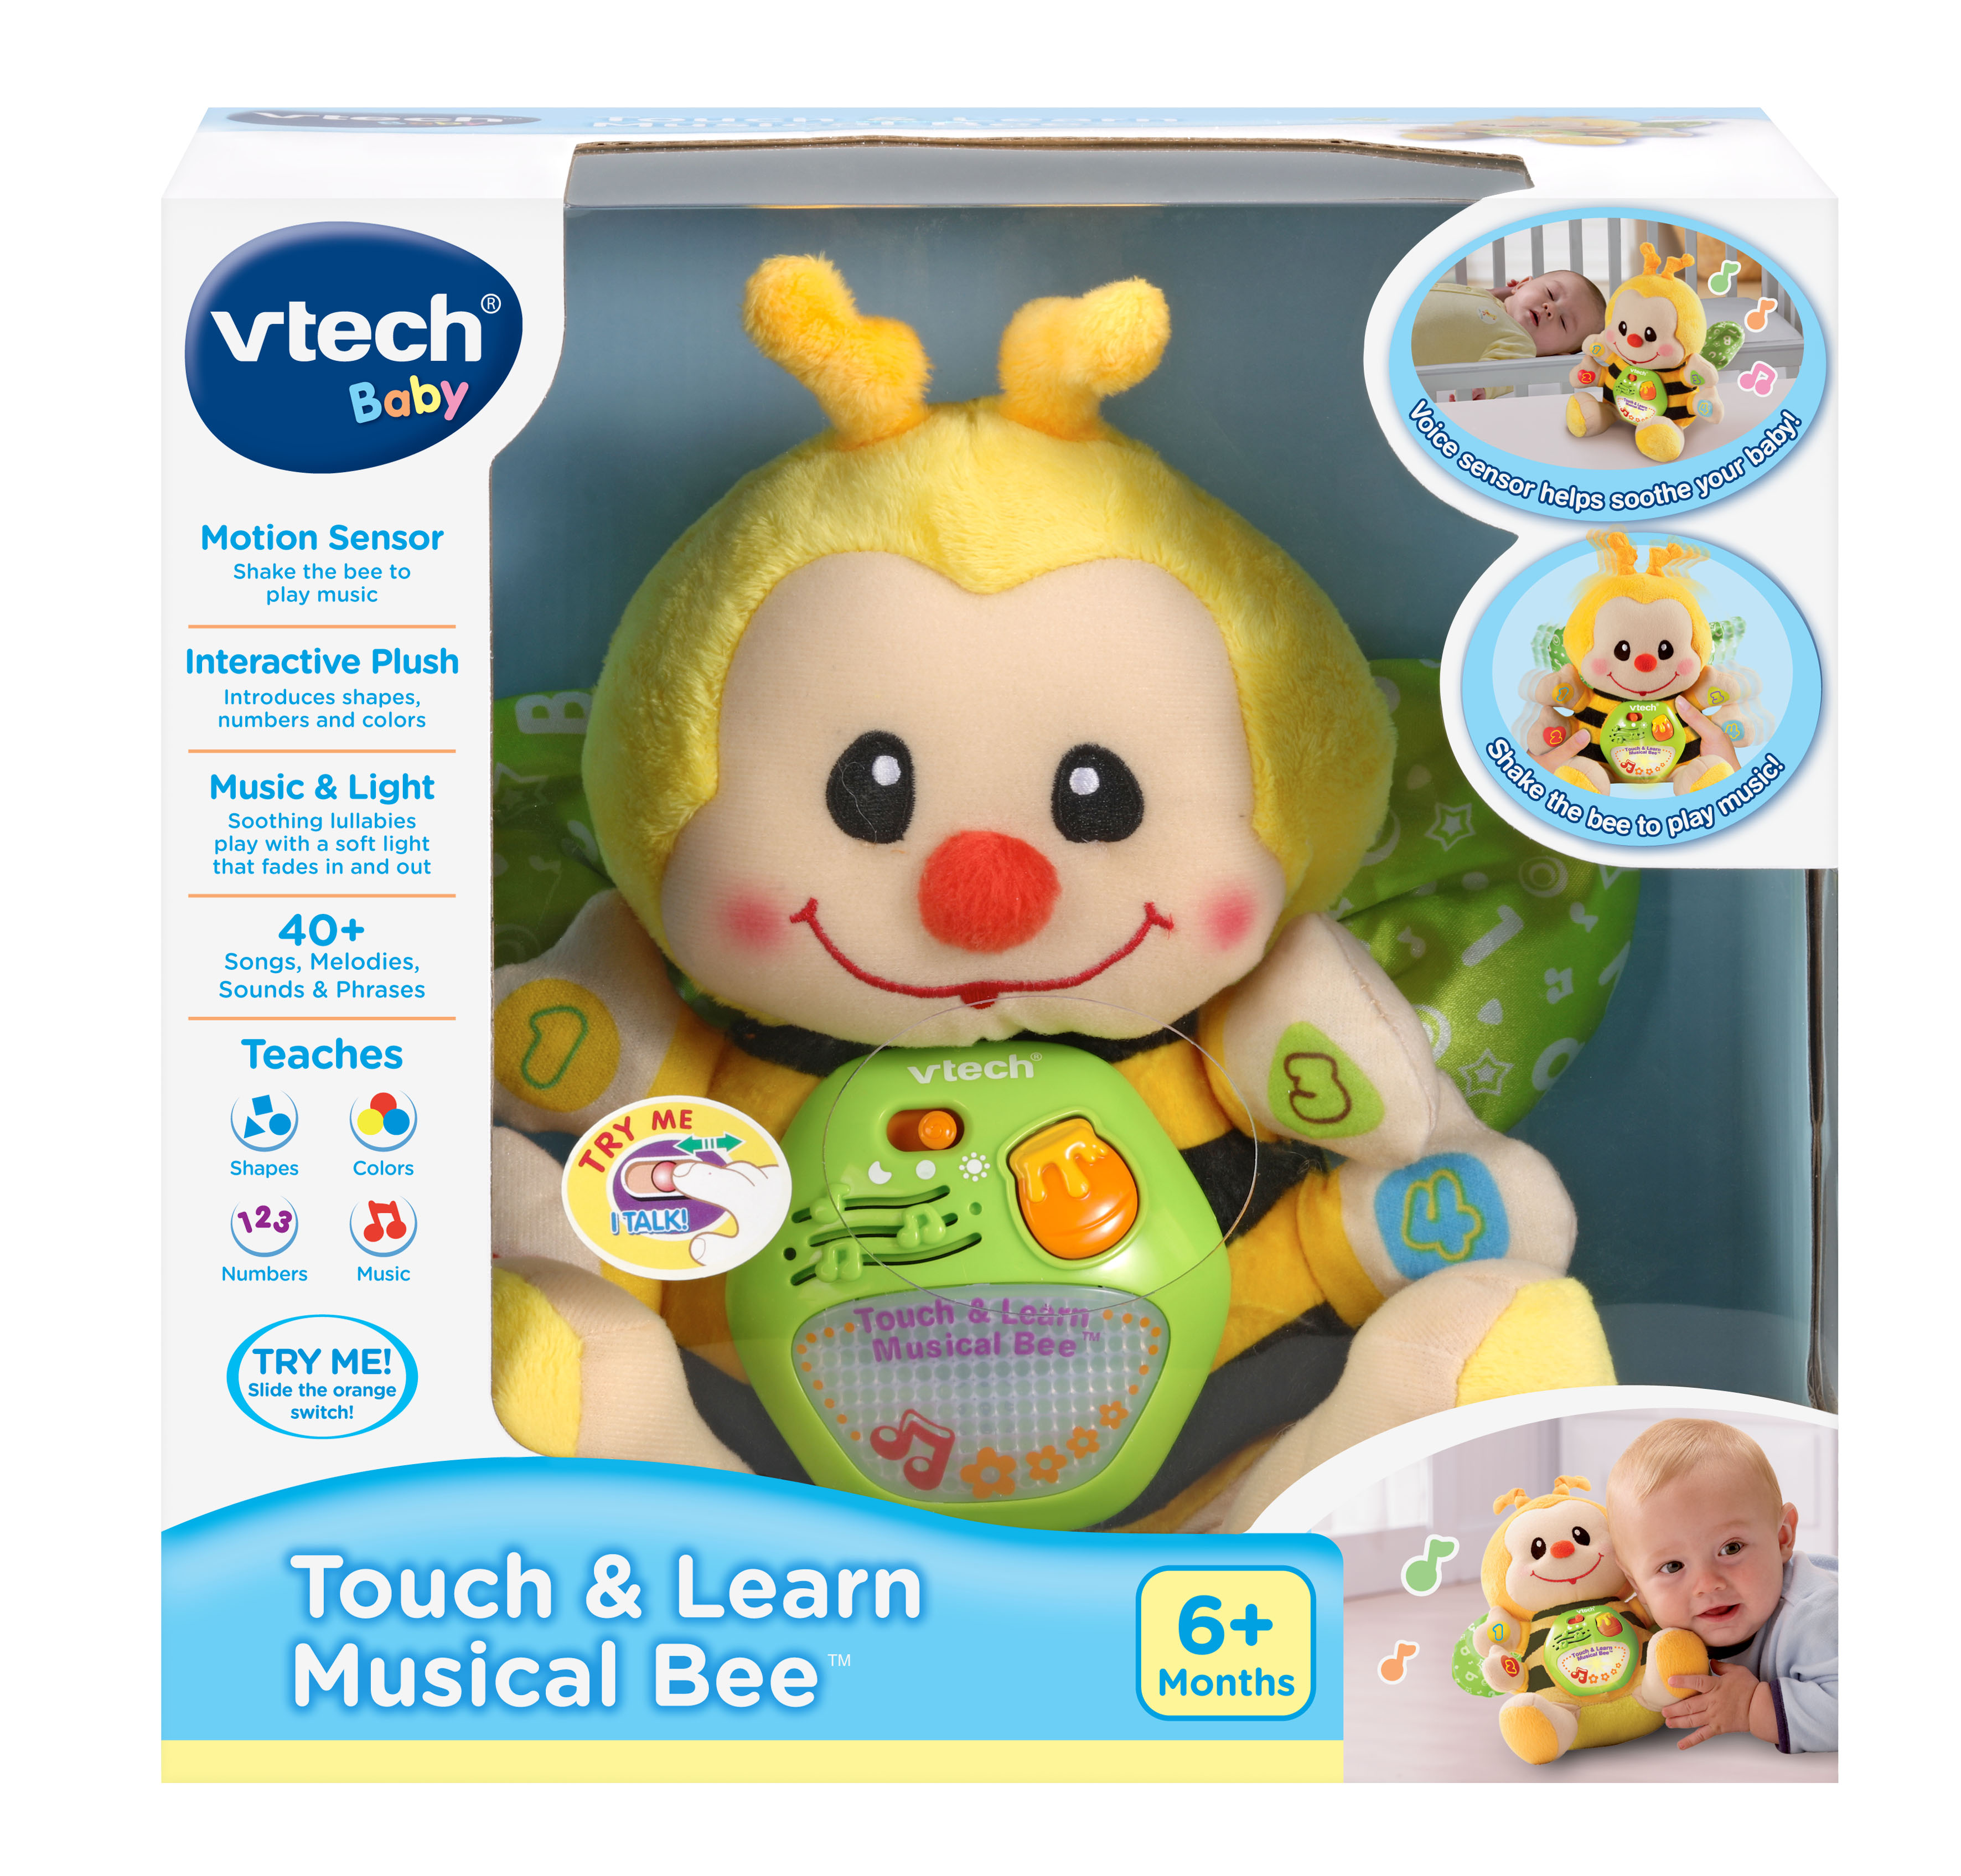 VTech Touch and Learn Musical Bee, Crib Baby Toy, Yellow Plush, Walmart Exclusive - image 5 of 5